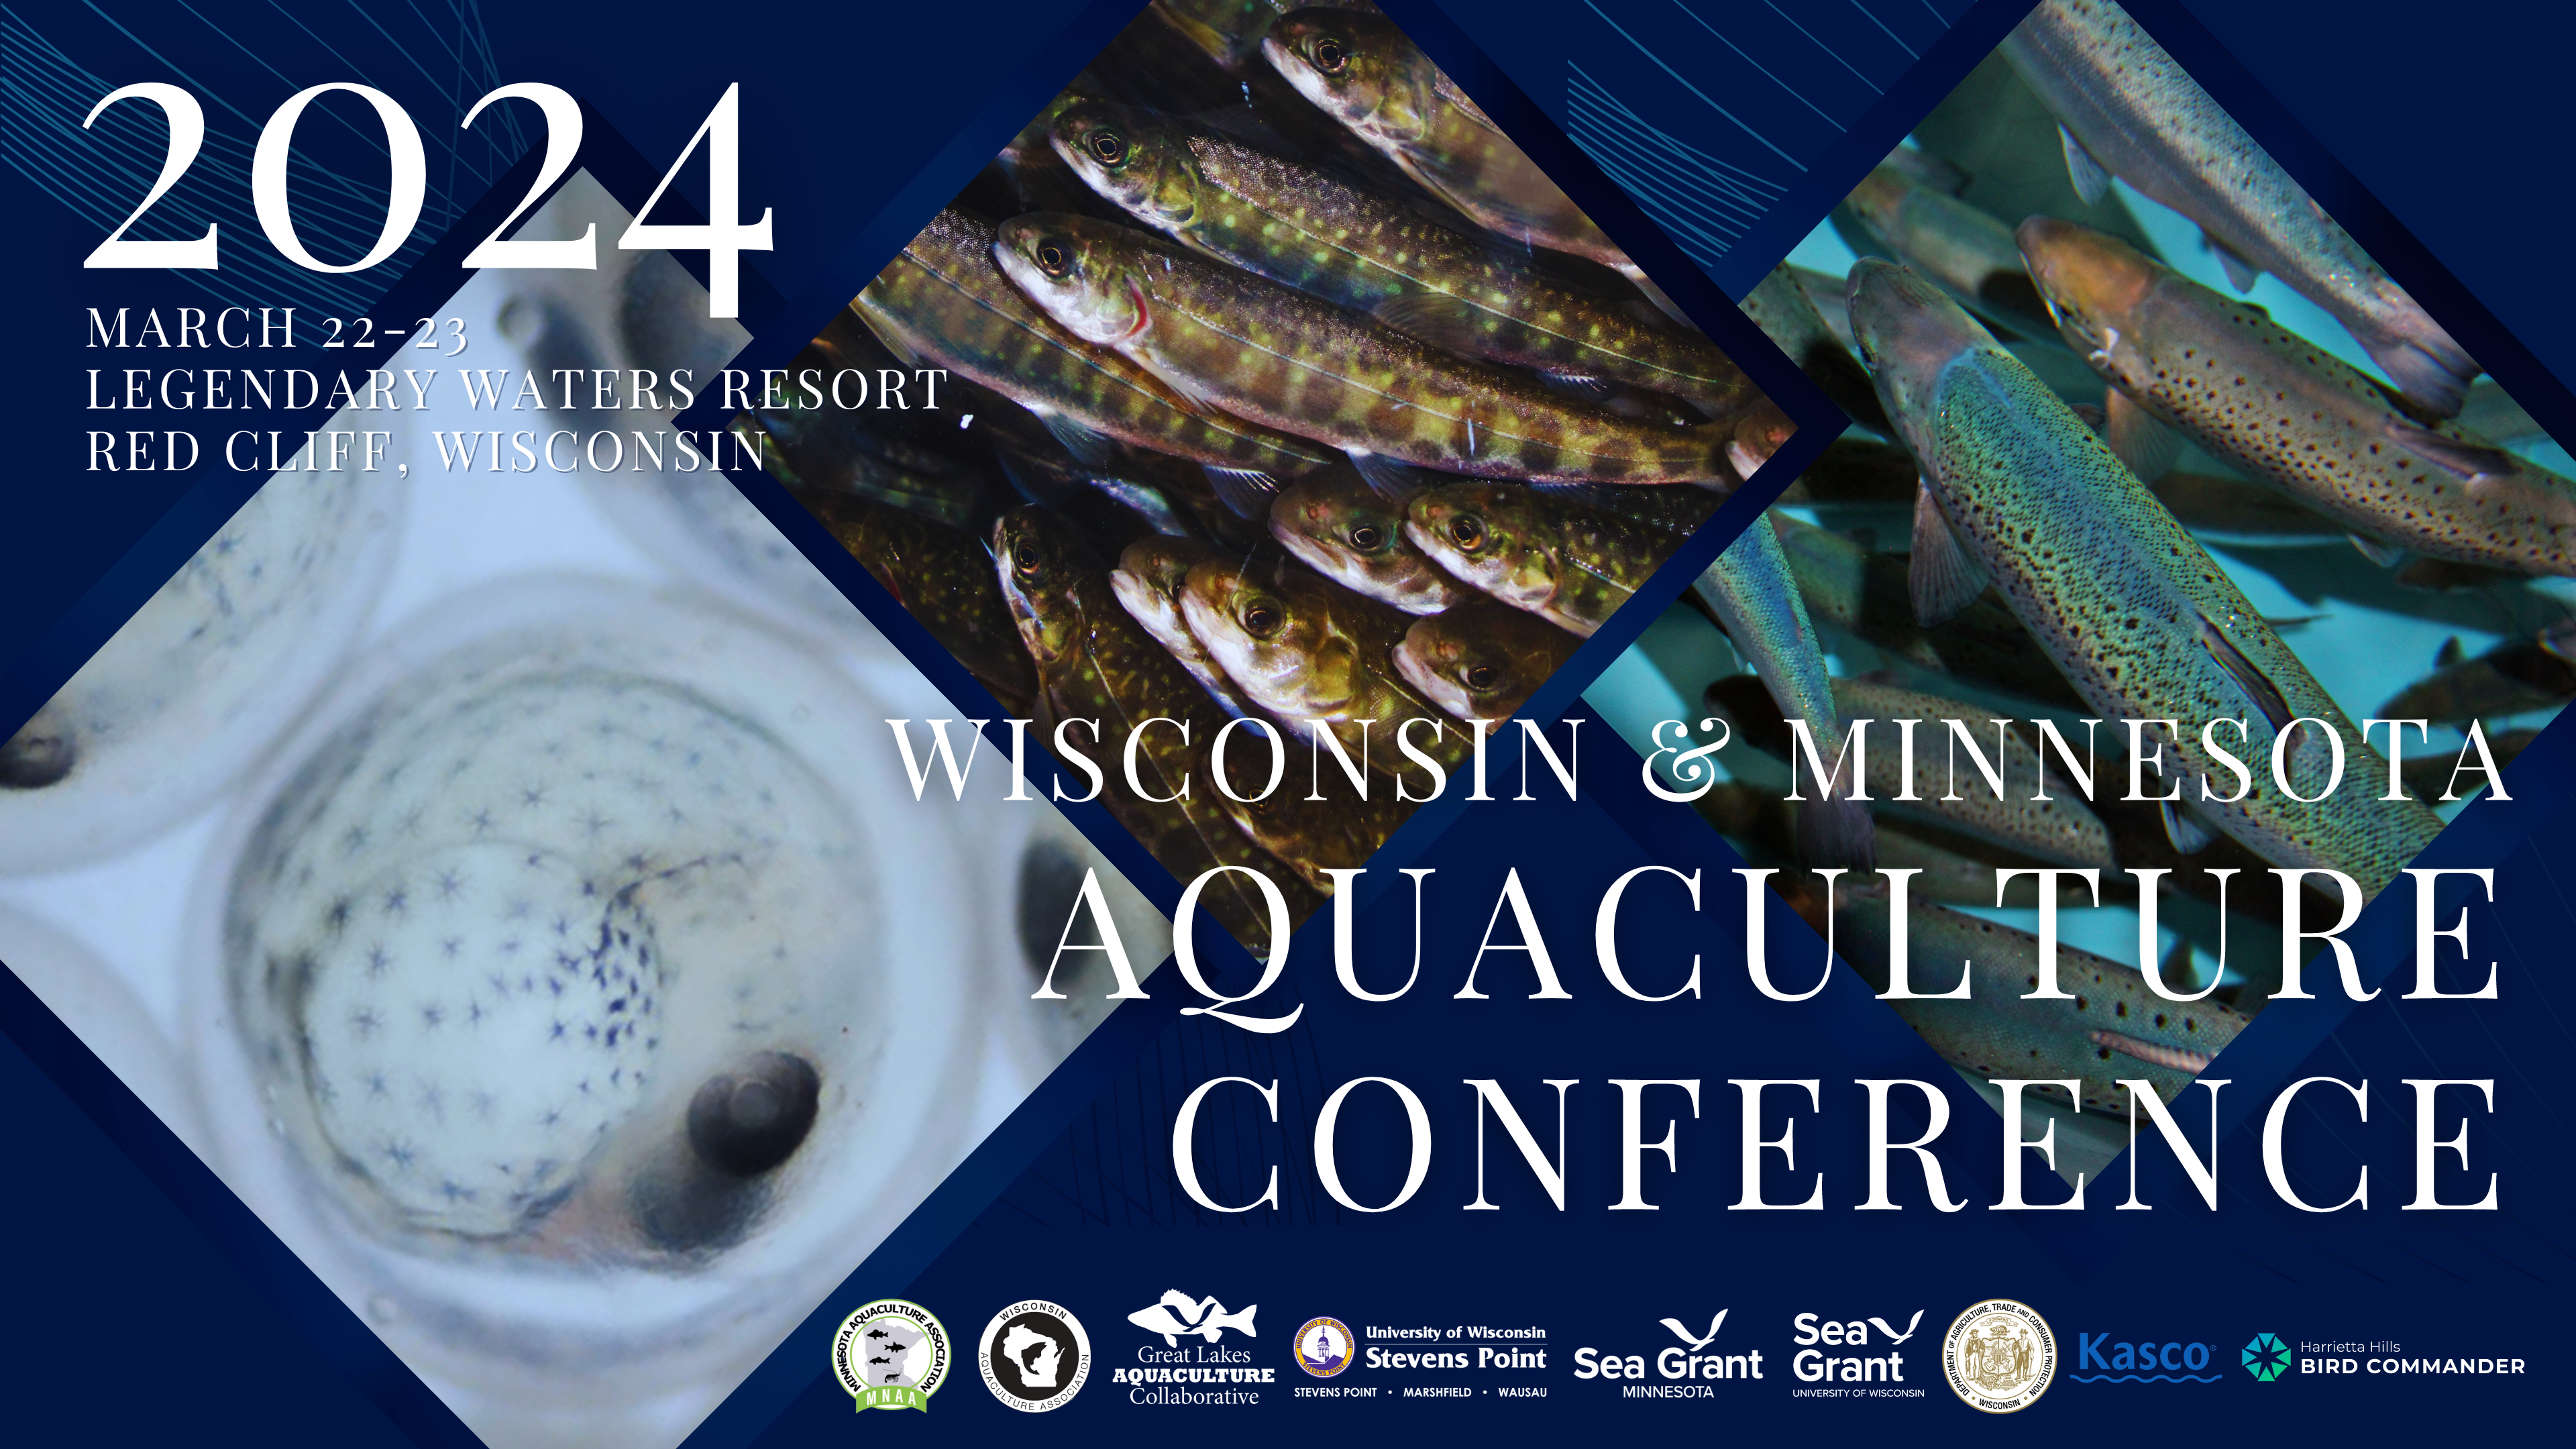 a graphic announcing the Wisconsin and Minnesota Aquaculture conference on March 22-23